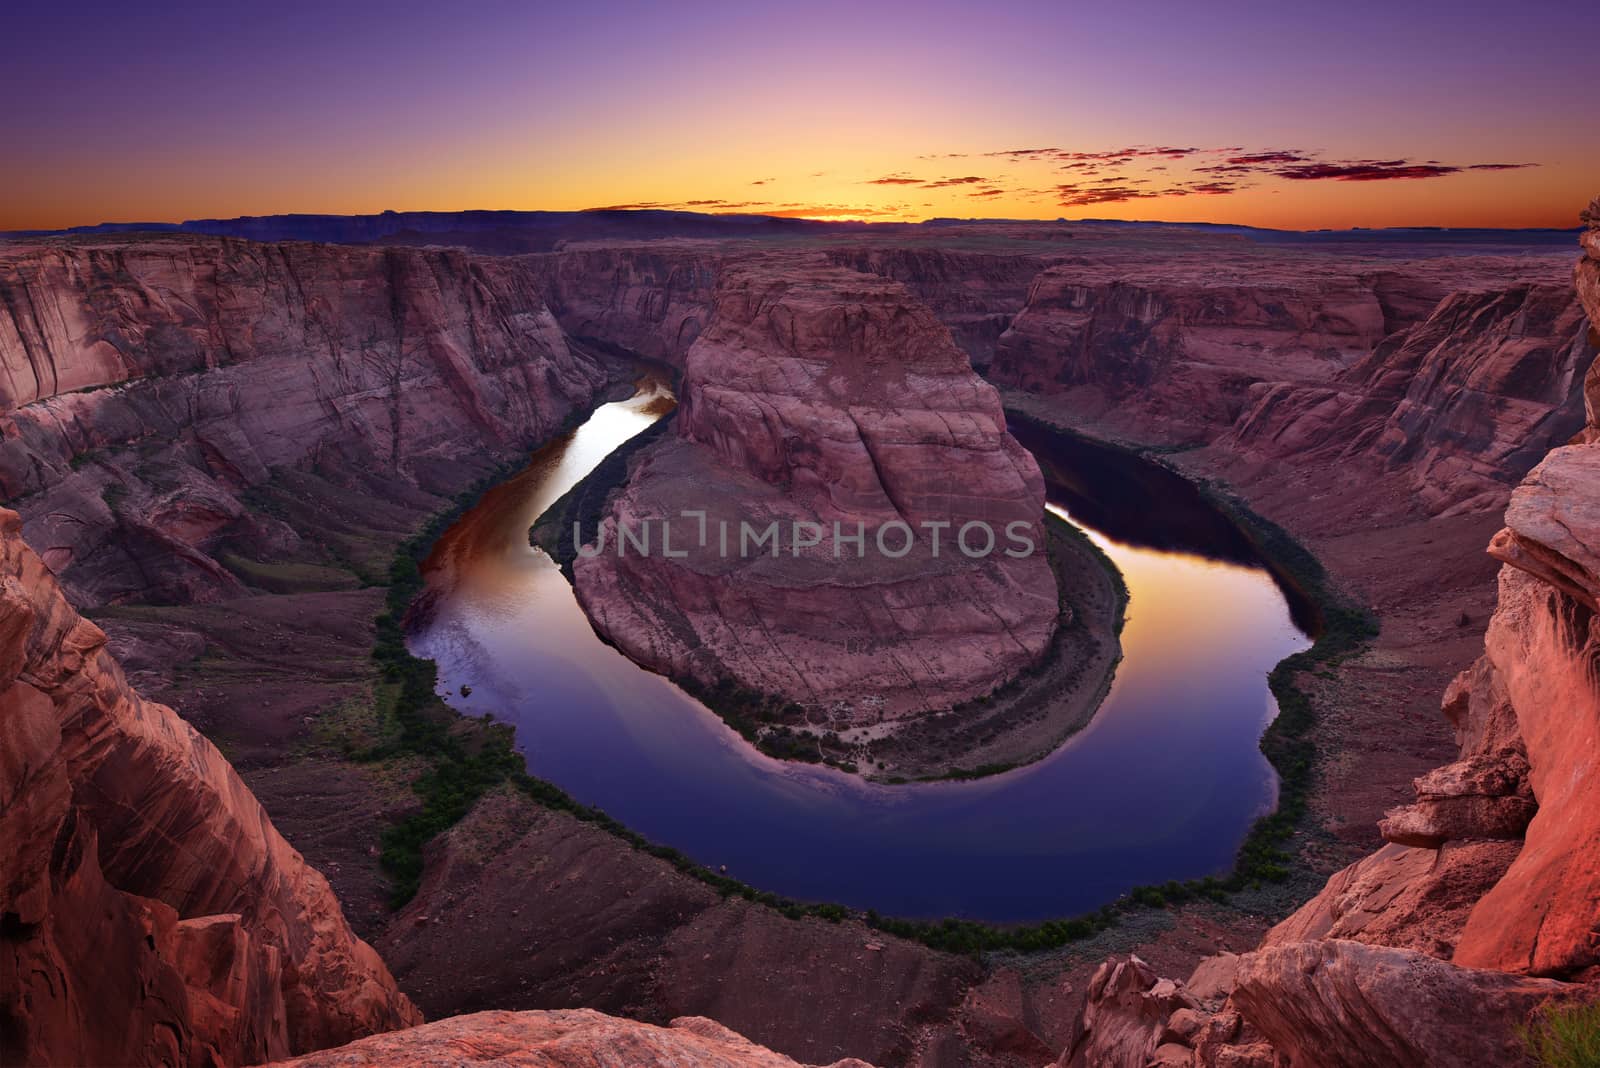 A colorful sunset at Horseshoe Bend in Page, Arizona USA